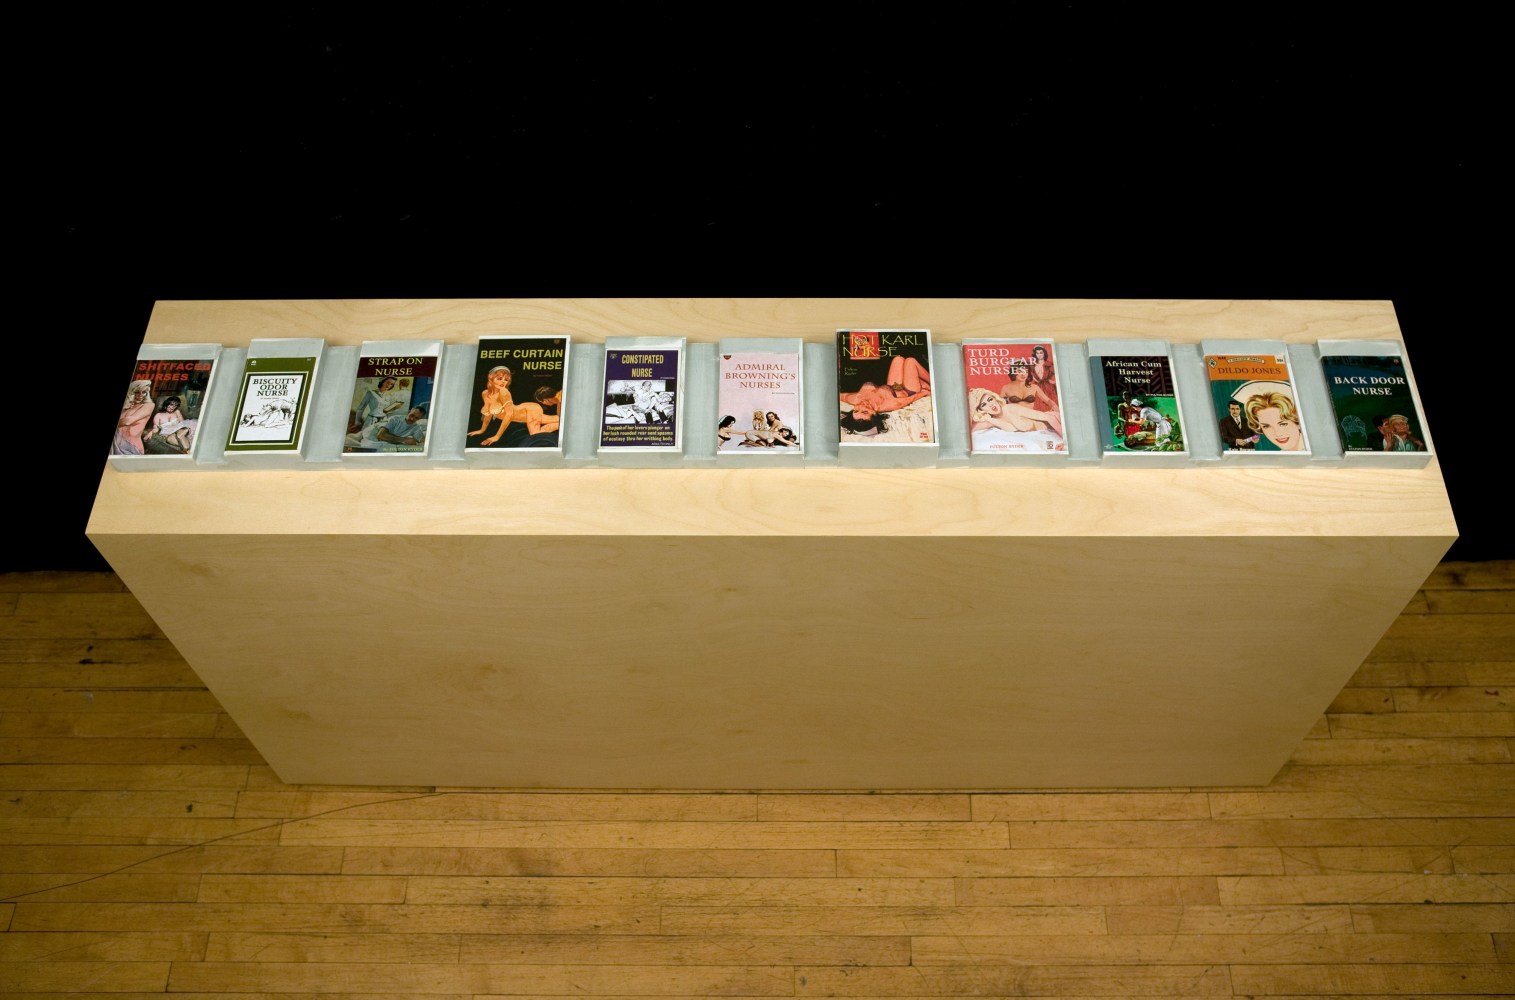 Bad Nurse, 2008&amp;nbsp;
Sculpture with 11 books mounted in custom tray with pedestal
Book Tray: 8 1/2&amp;nbsp;x 77 x 2 inches
Pedestal: 79 x 17 1/2&amp;nbsp;x 39 3/4 inches
Edition of 2